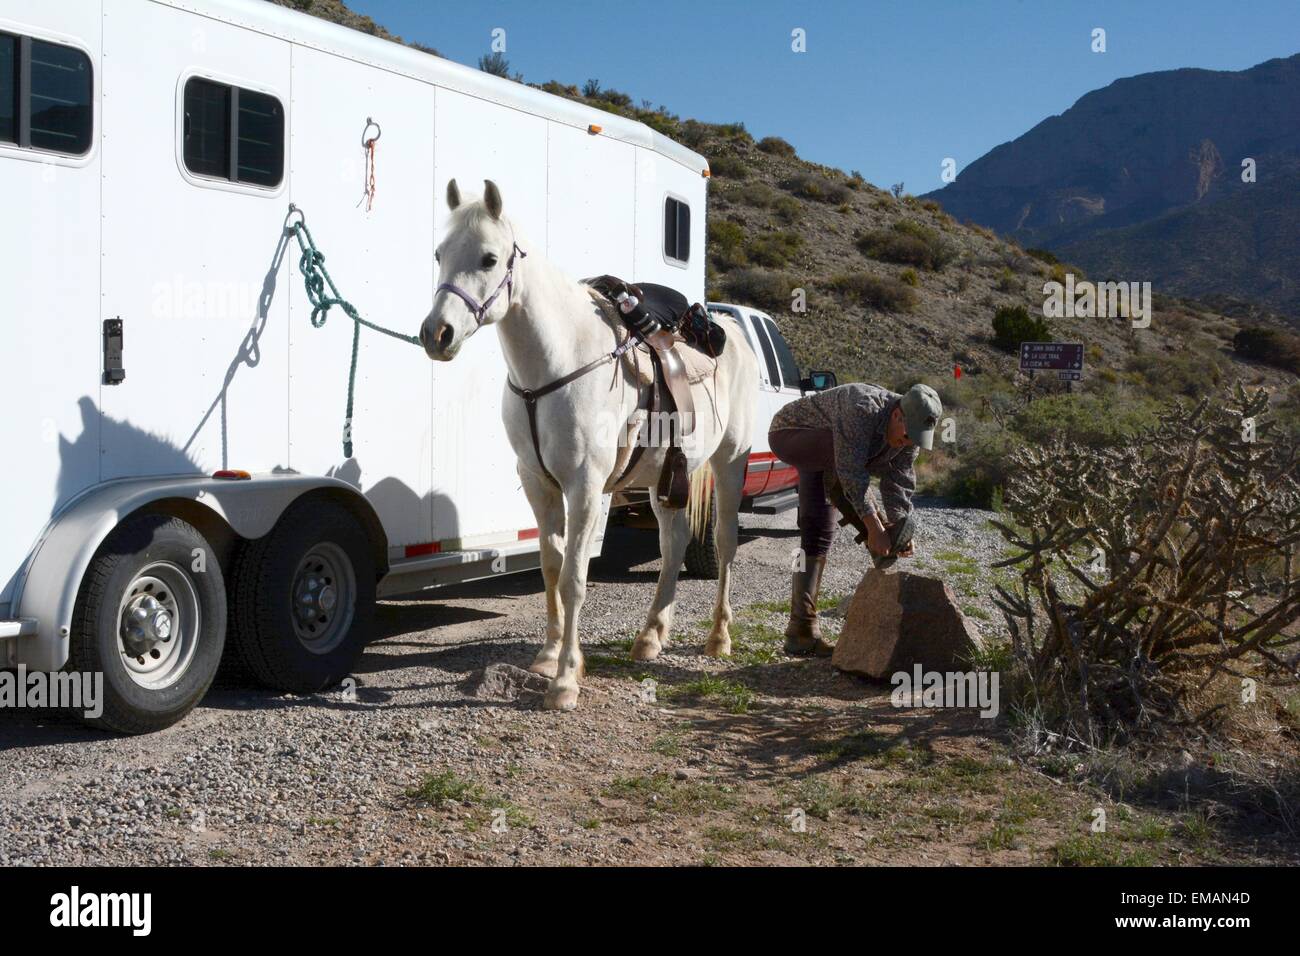 Arabian horse saddled and ready for a ride and me putting on my half-chaps; New Mexico - USA Stock Photo